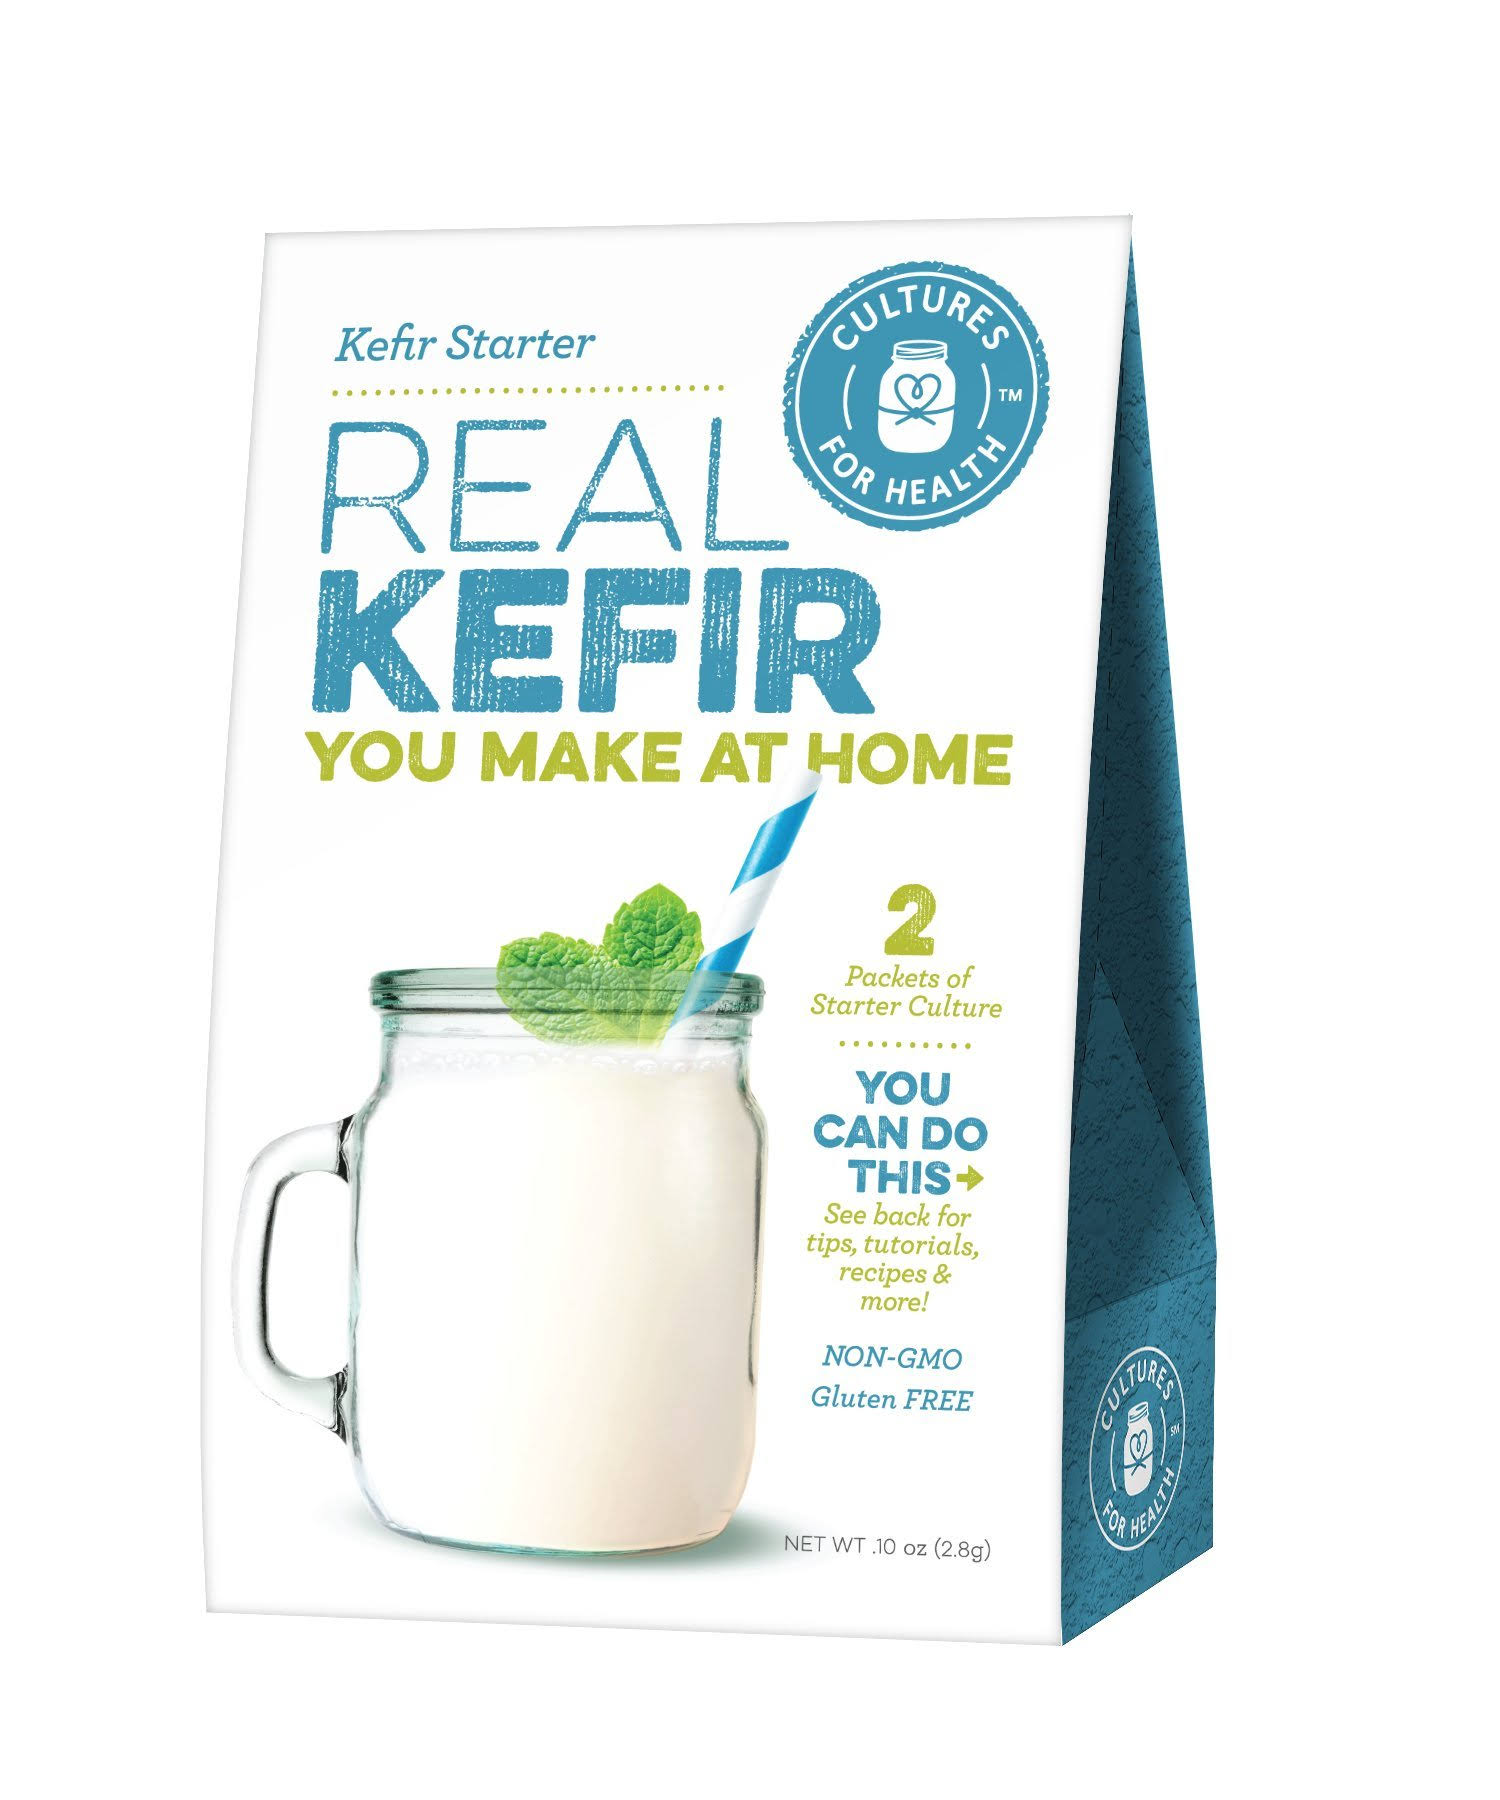 Cultures For Health Real Kefir Starter Culture - 2 Packets